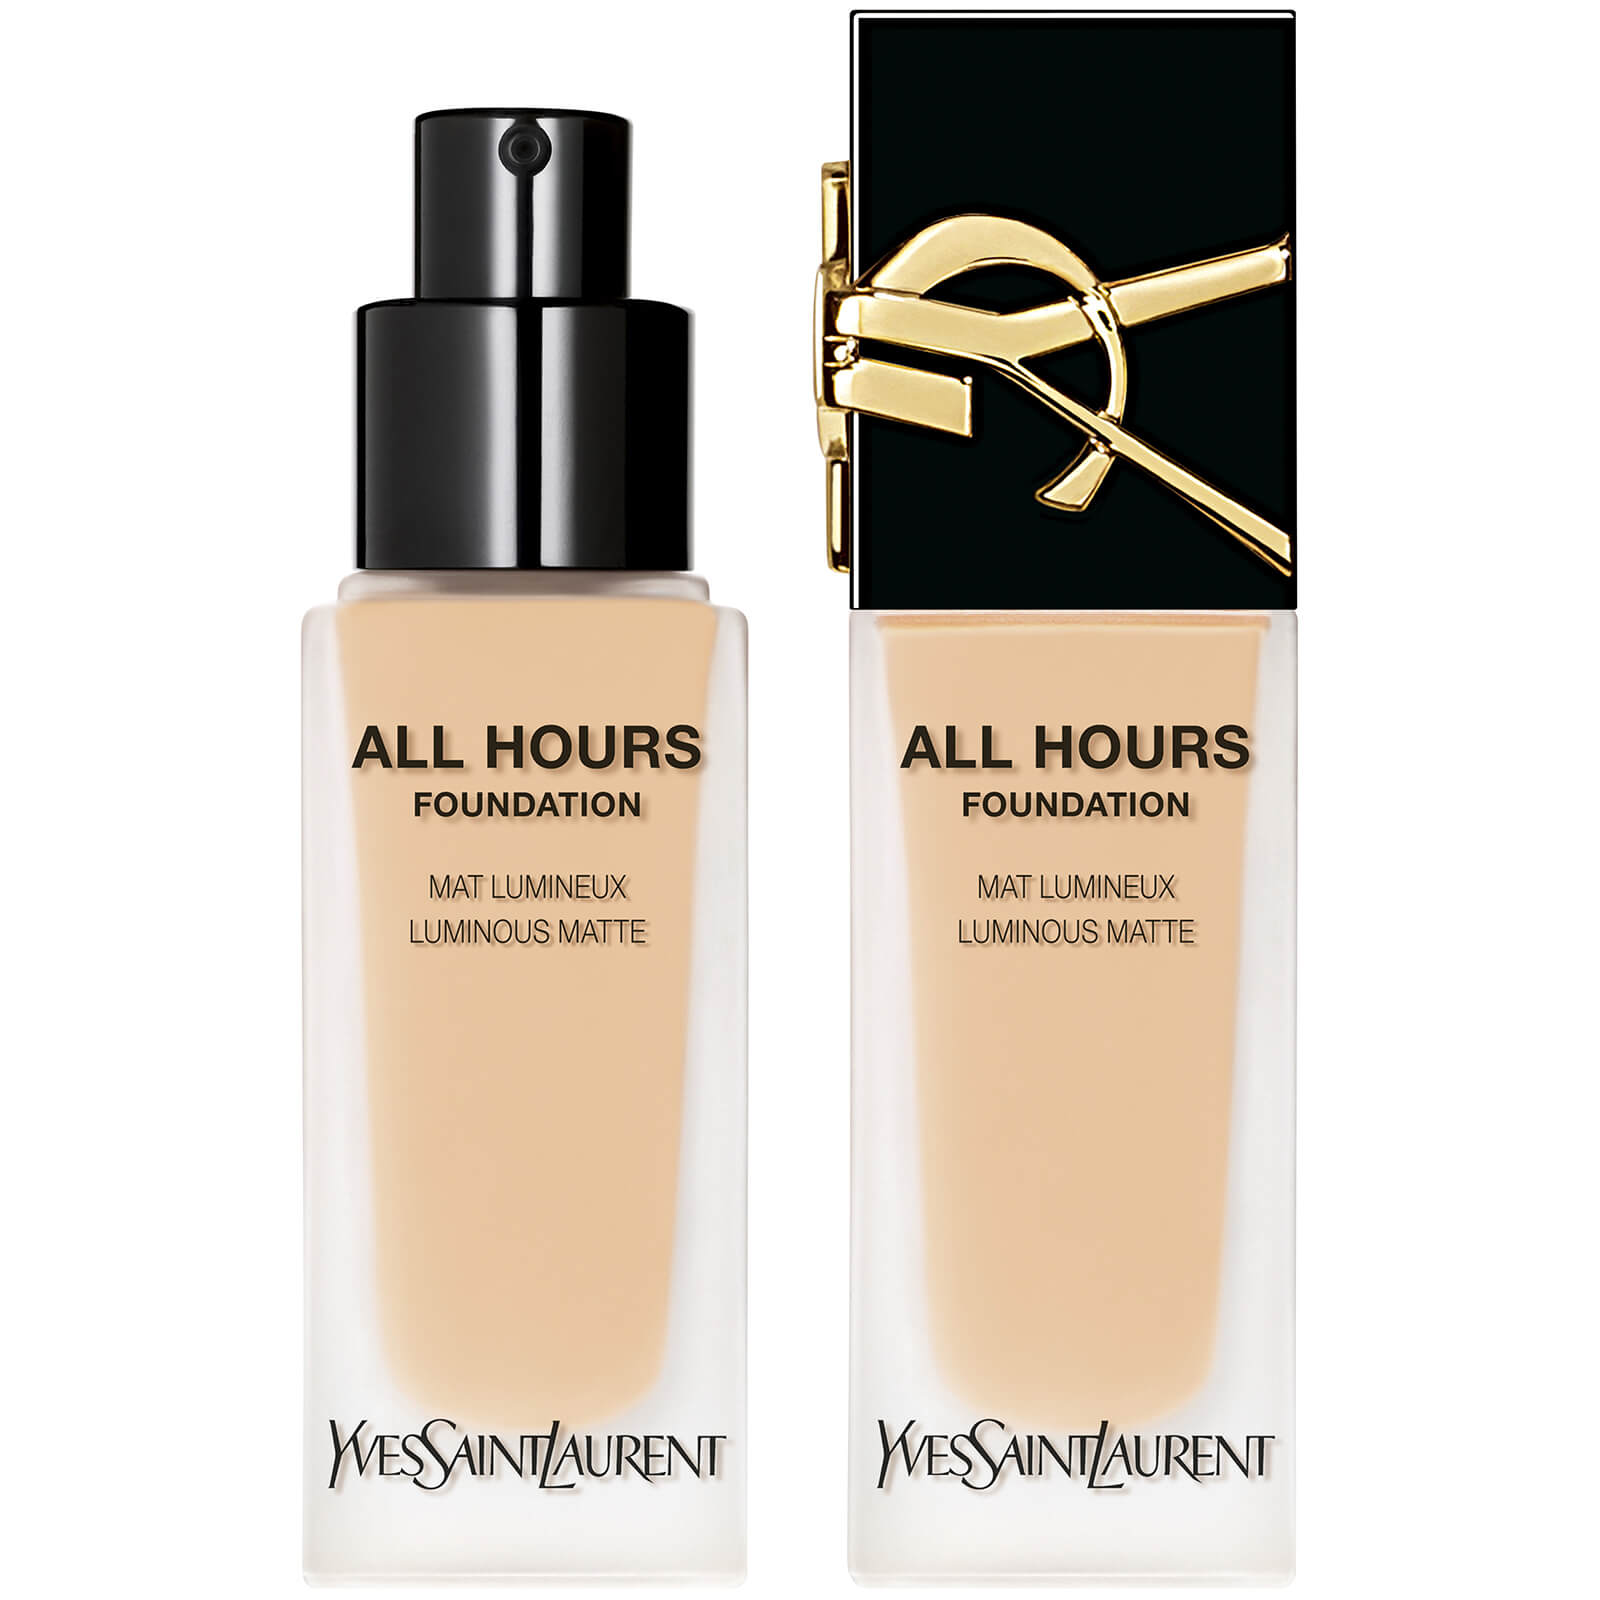 Yves Saint Laurent All Hours Luminous Matte Foundation with SPF 39 25ml (Various Shades) - LC1 product